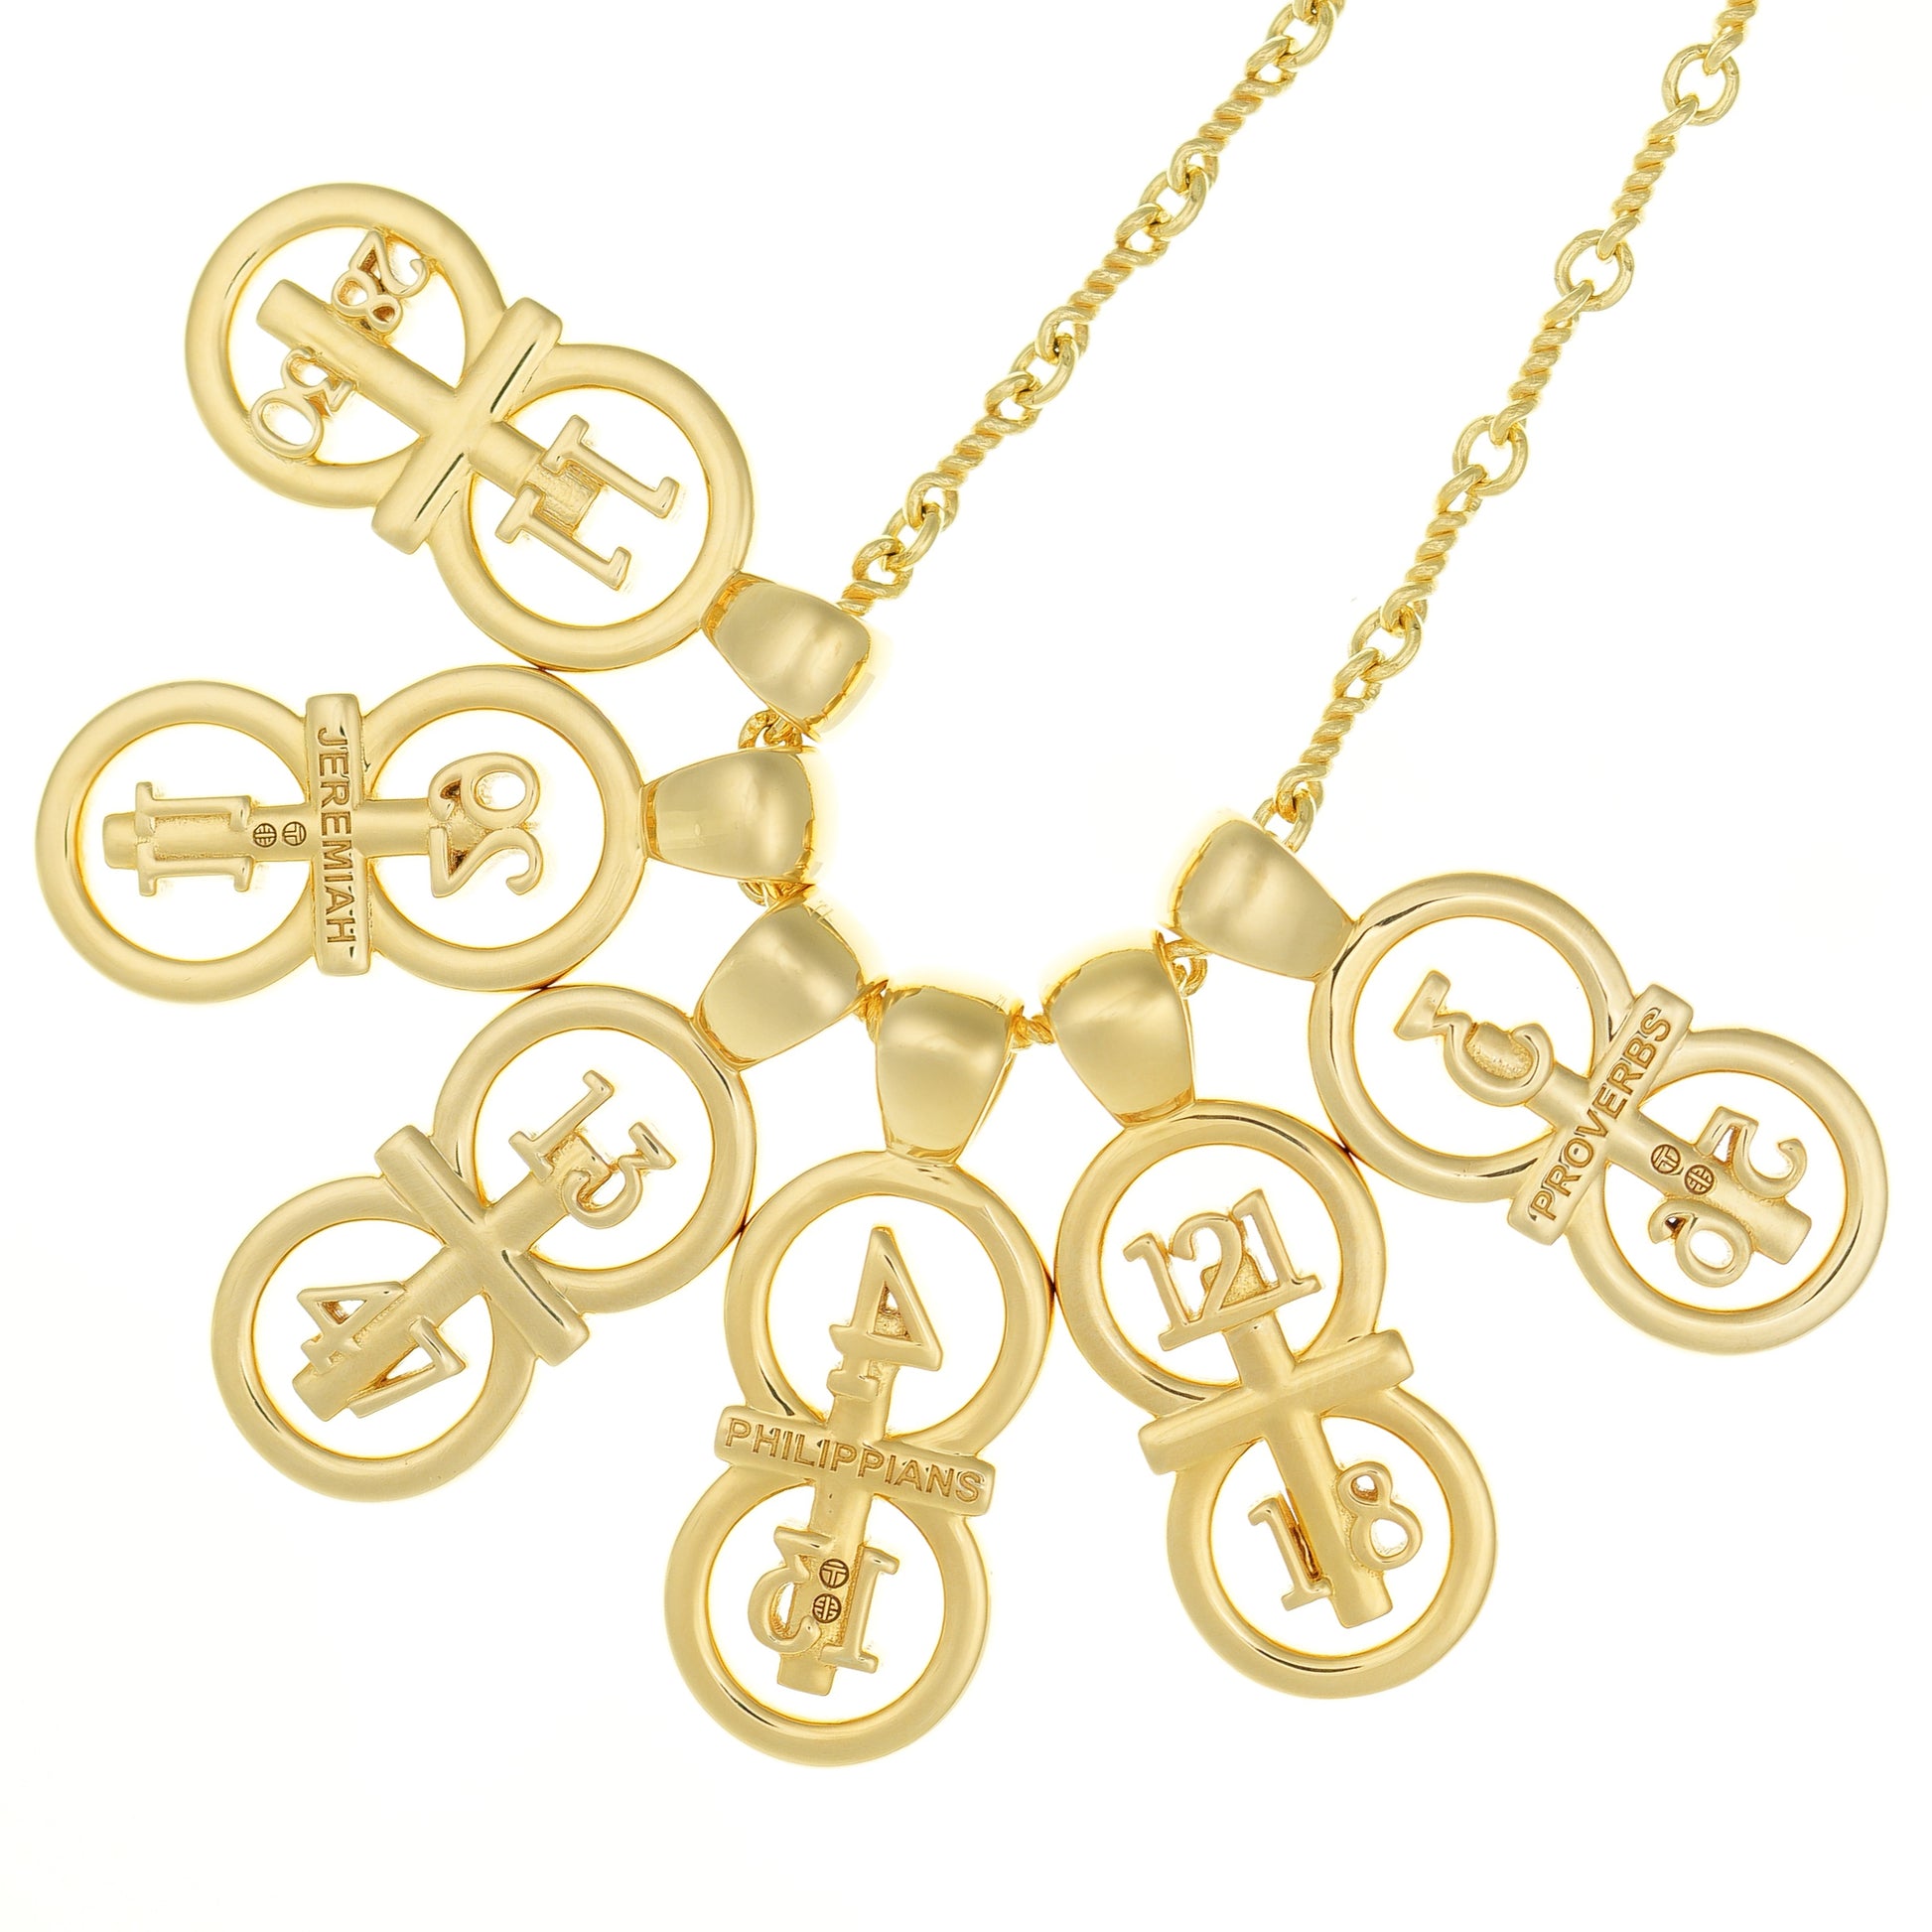 All pendants we offer in the large size have been strung onto our Rolo chain.  This gives the viewer a chance to see the different verses offered in one view